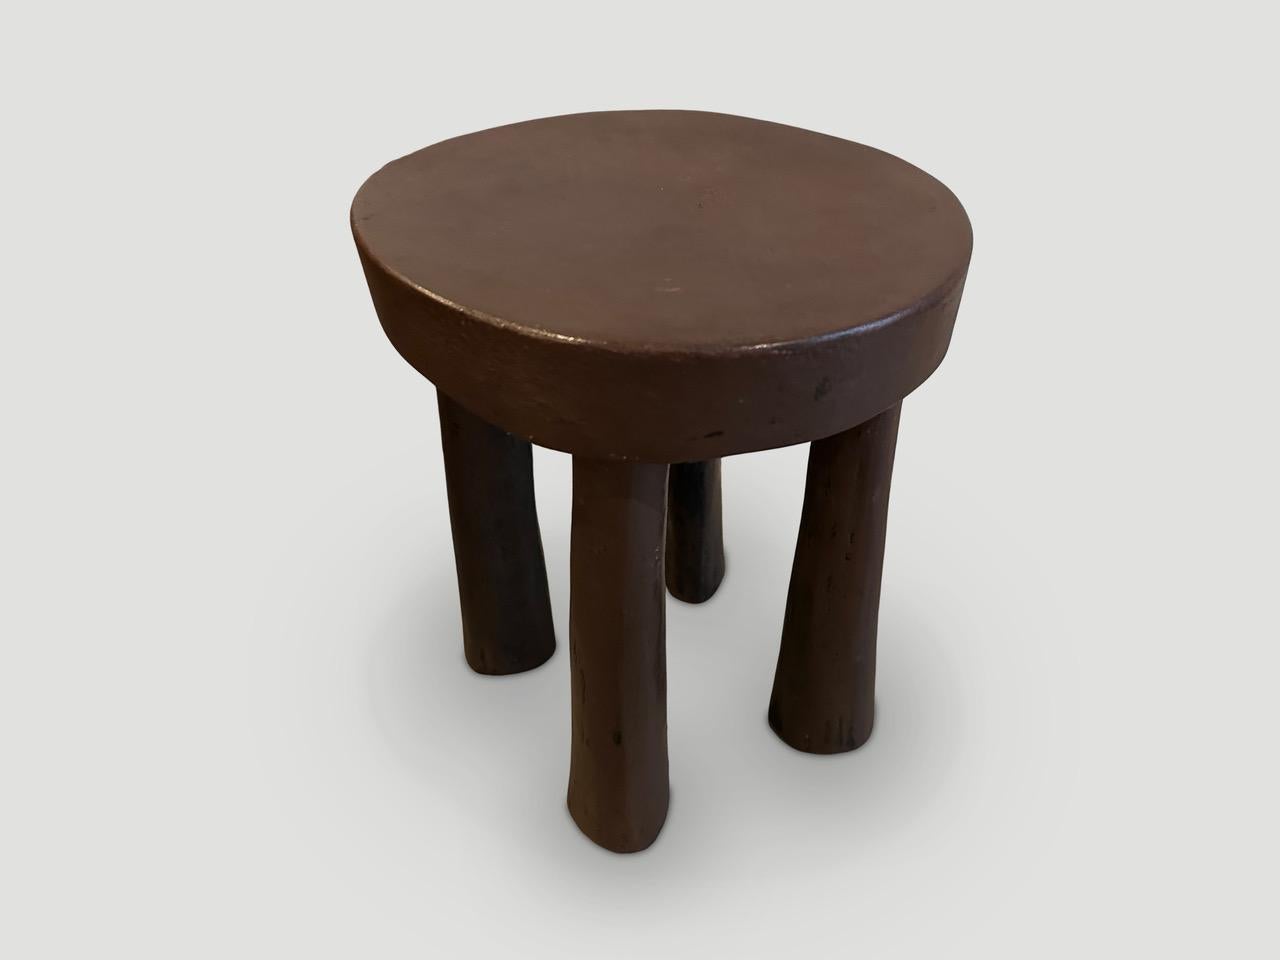 Antique African side table or stool hand carved from a single block of wood. 

This side table or stool was sourced in the spirit of Wabi-Sabi, a Japanese philosophy that beauty can be found in imperfection and impermanence. It is a beauty of